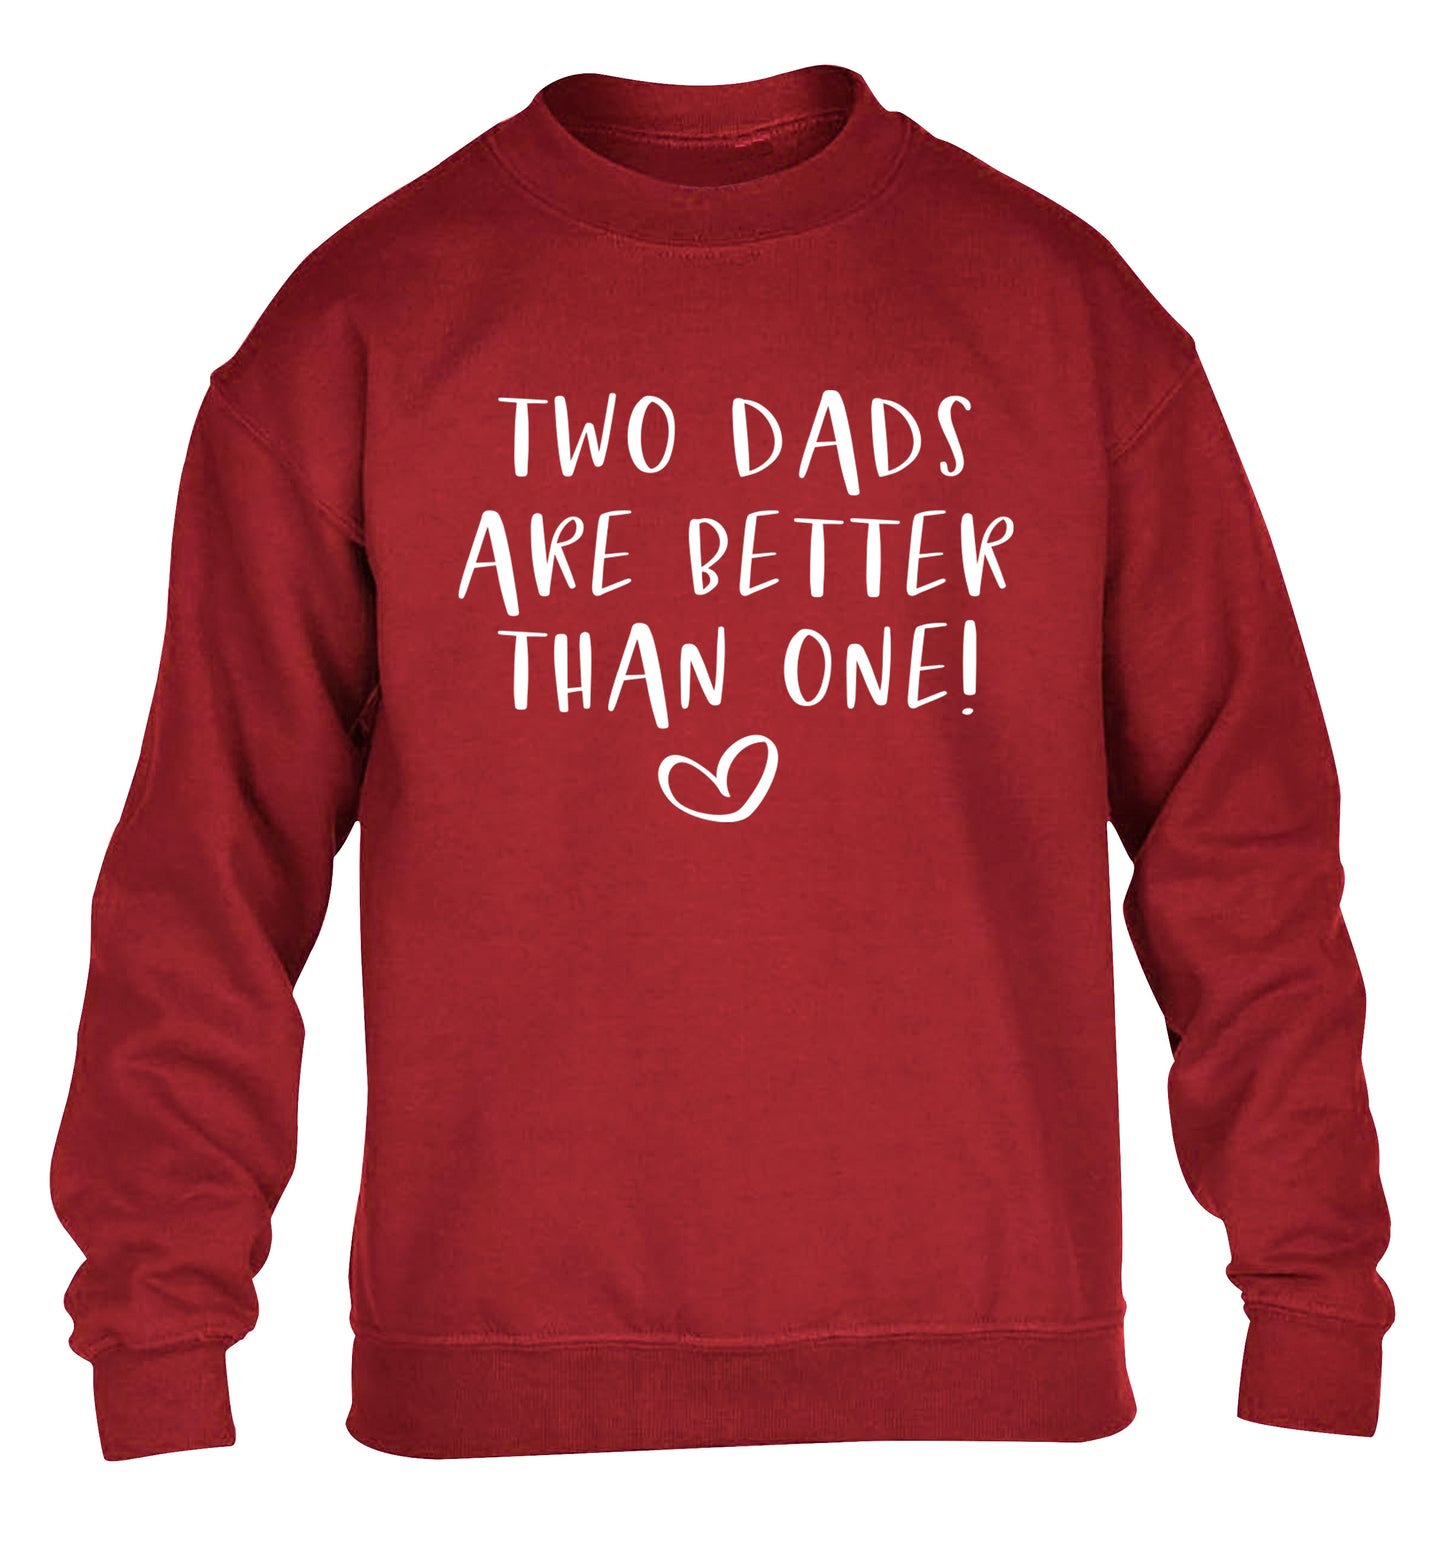 Two dads are better than one children's grey sweater 12-13 Years